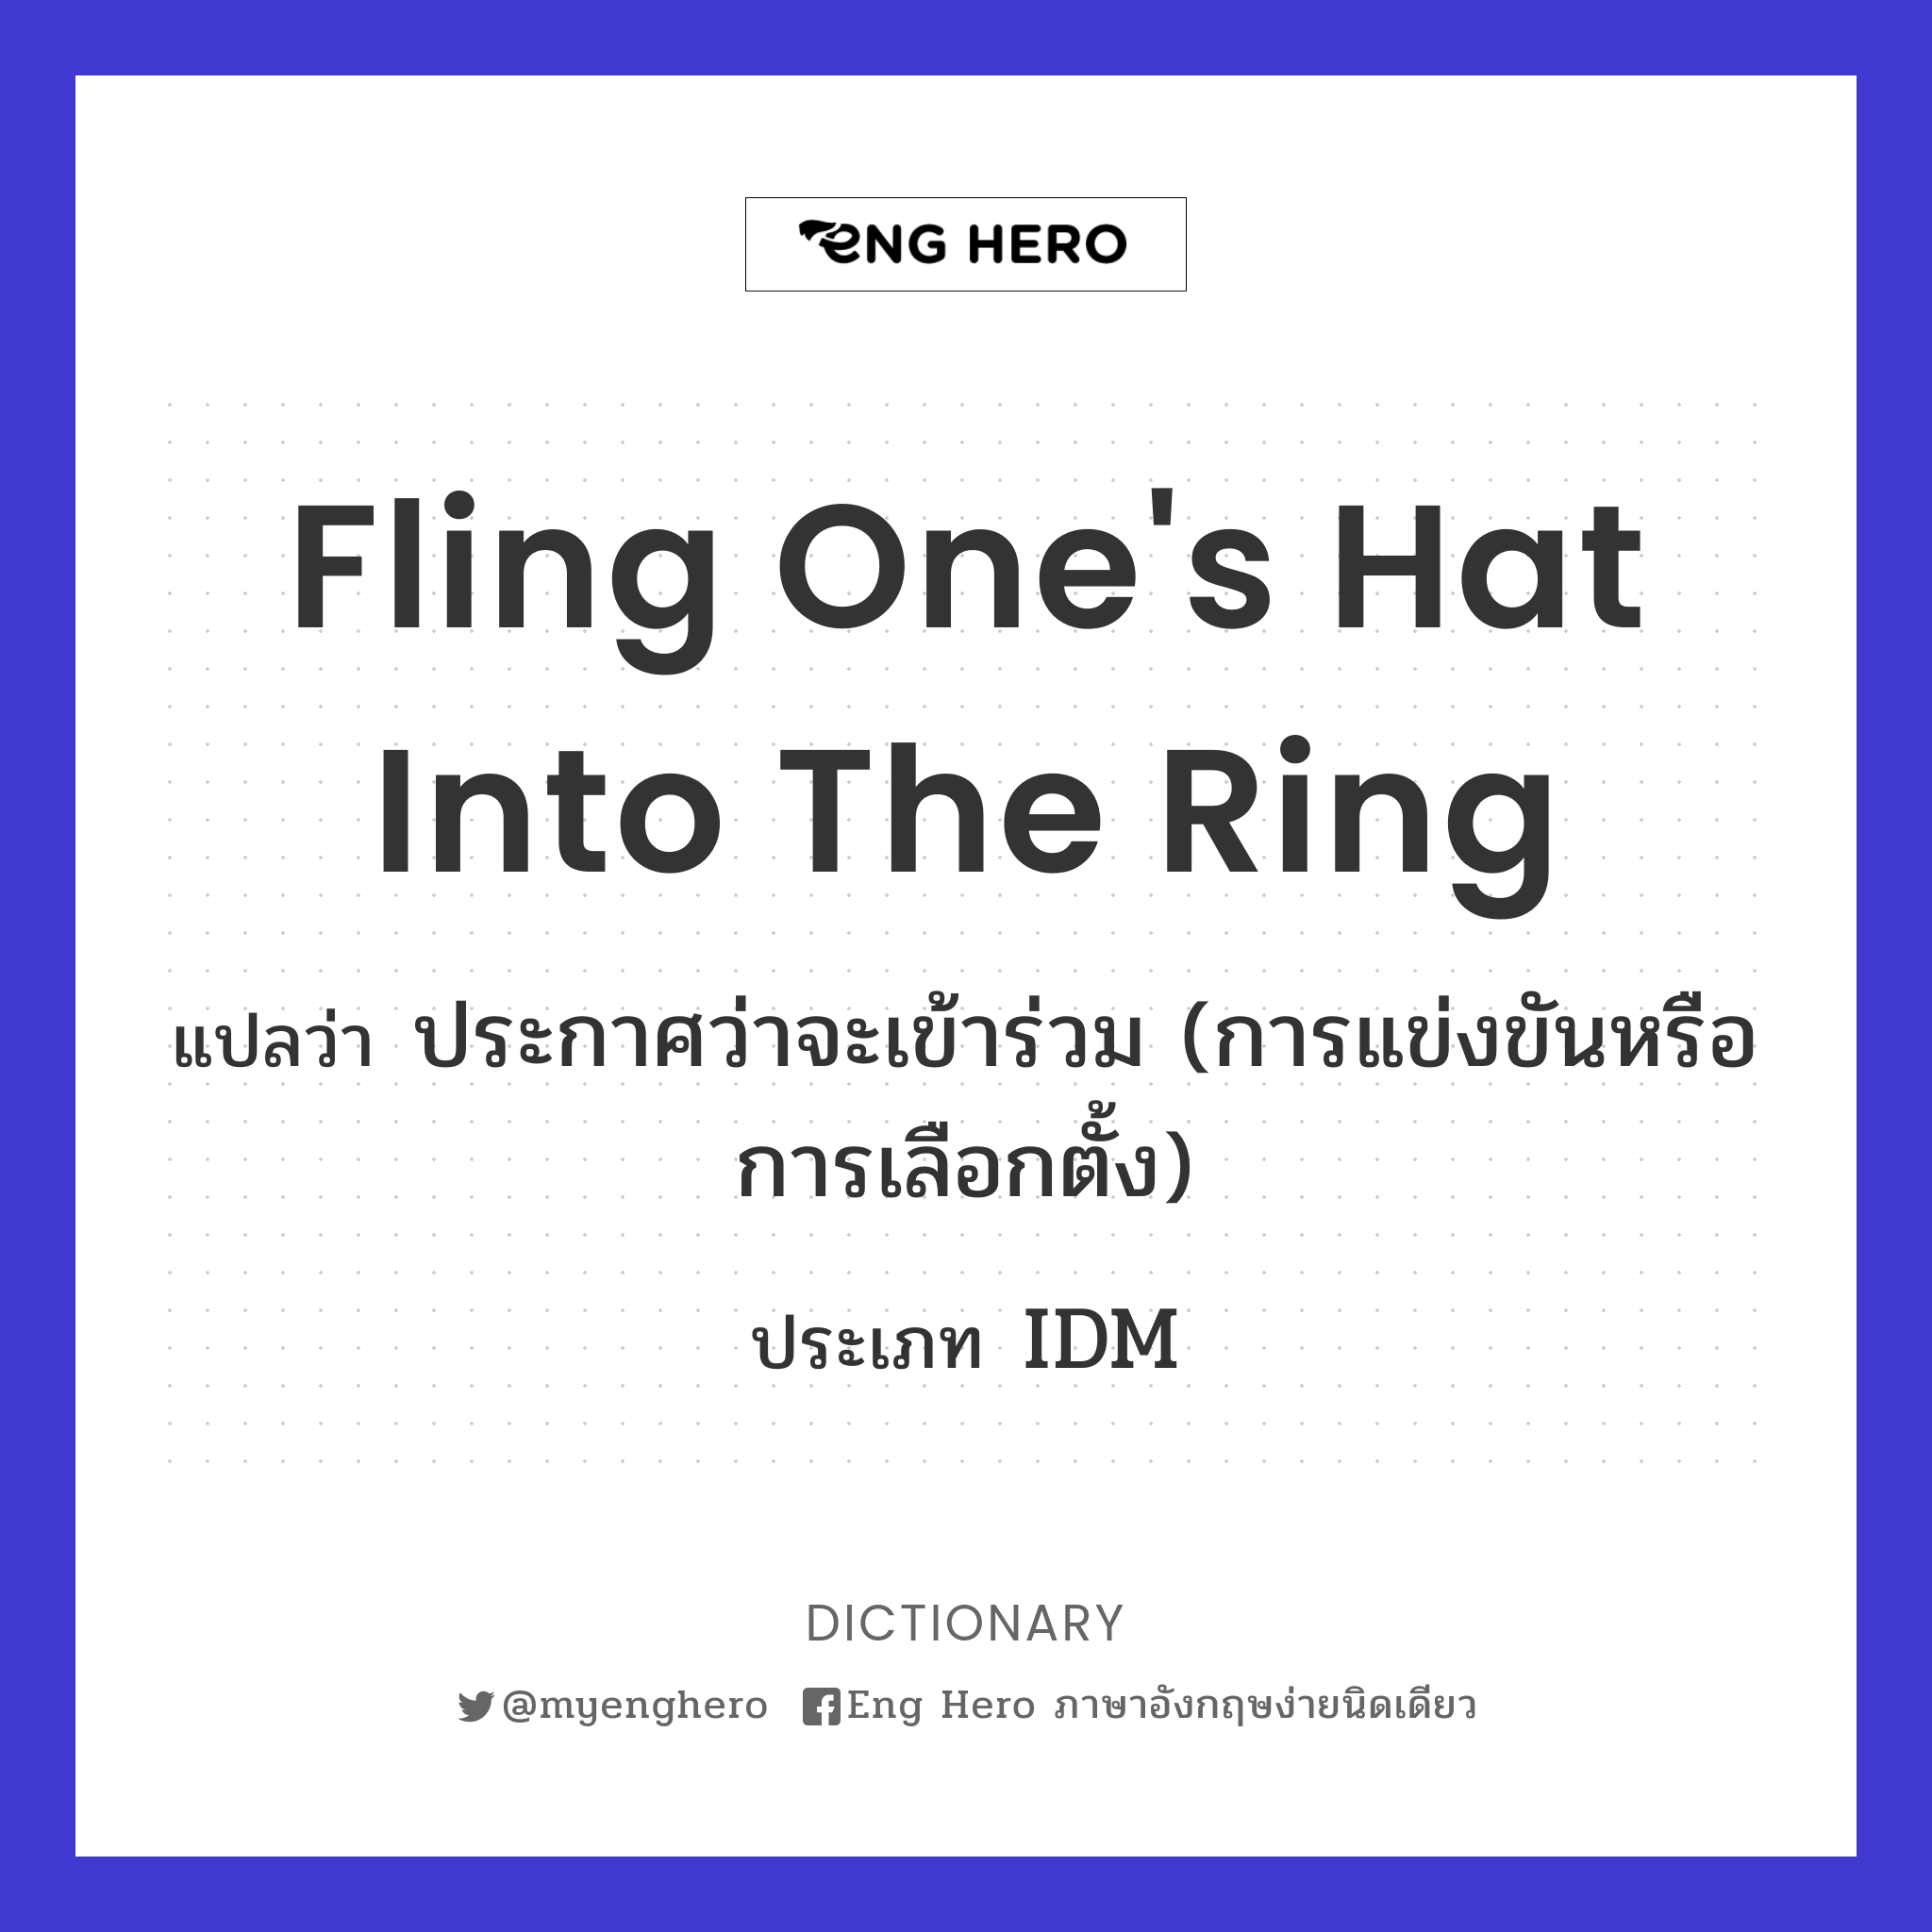 fling one's hat into the ring